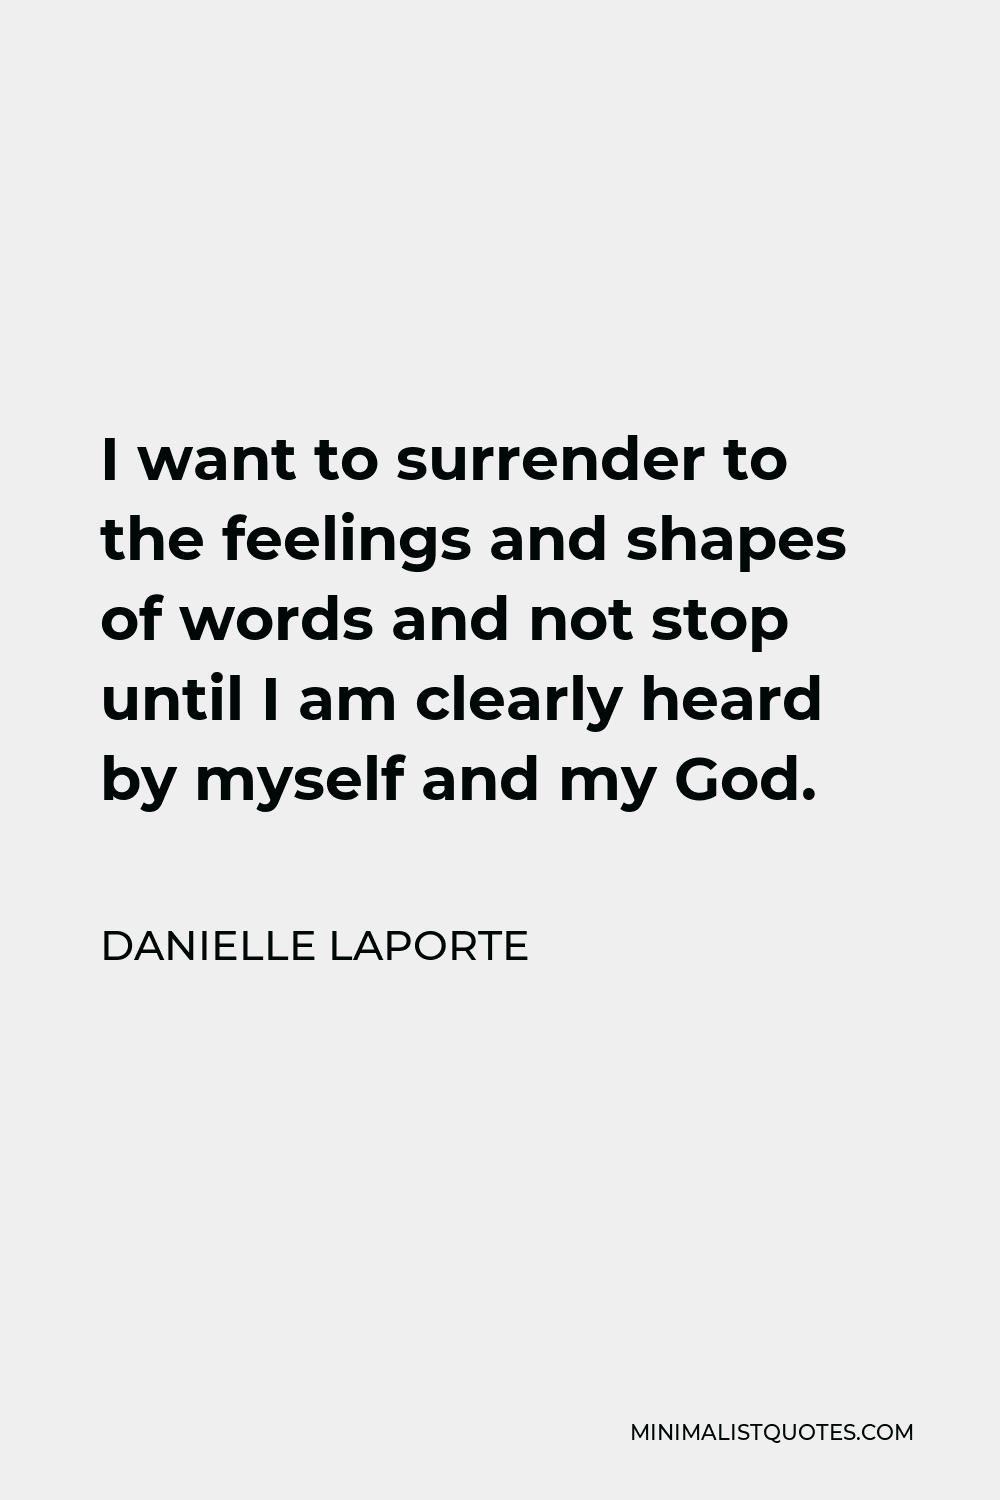 Danielle LaPorte Quote - I want to surrender to the feelings and shapes of words and not stop until I am clearly heard by myself and my God.